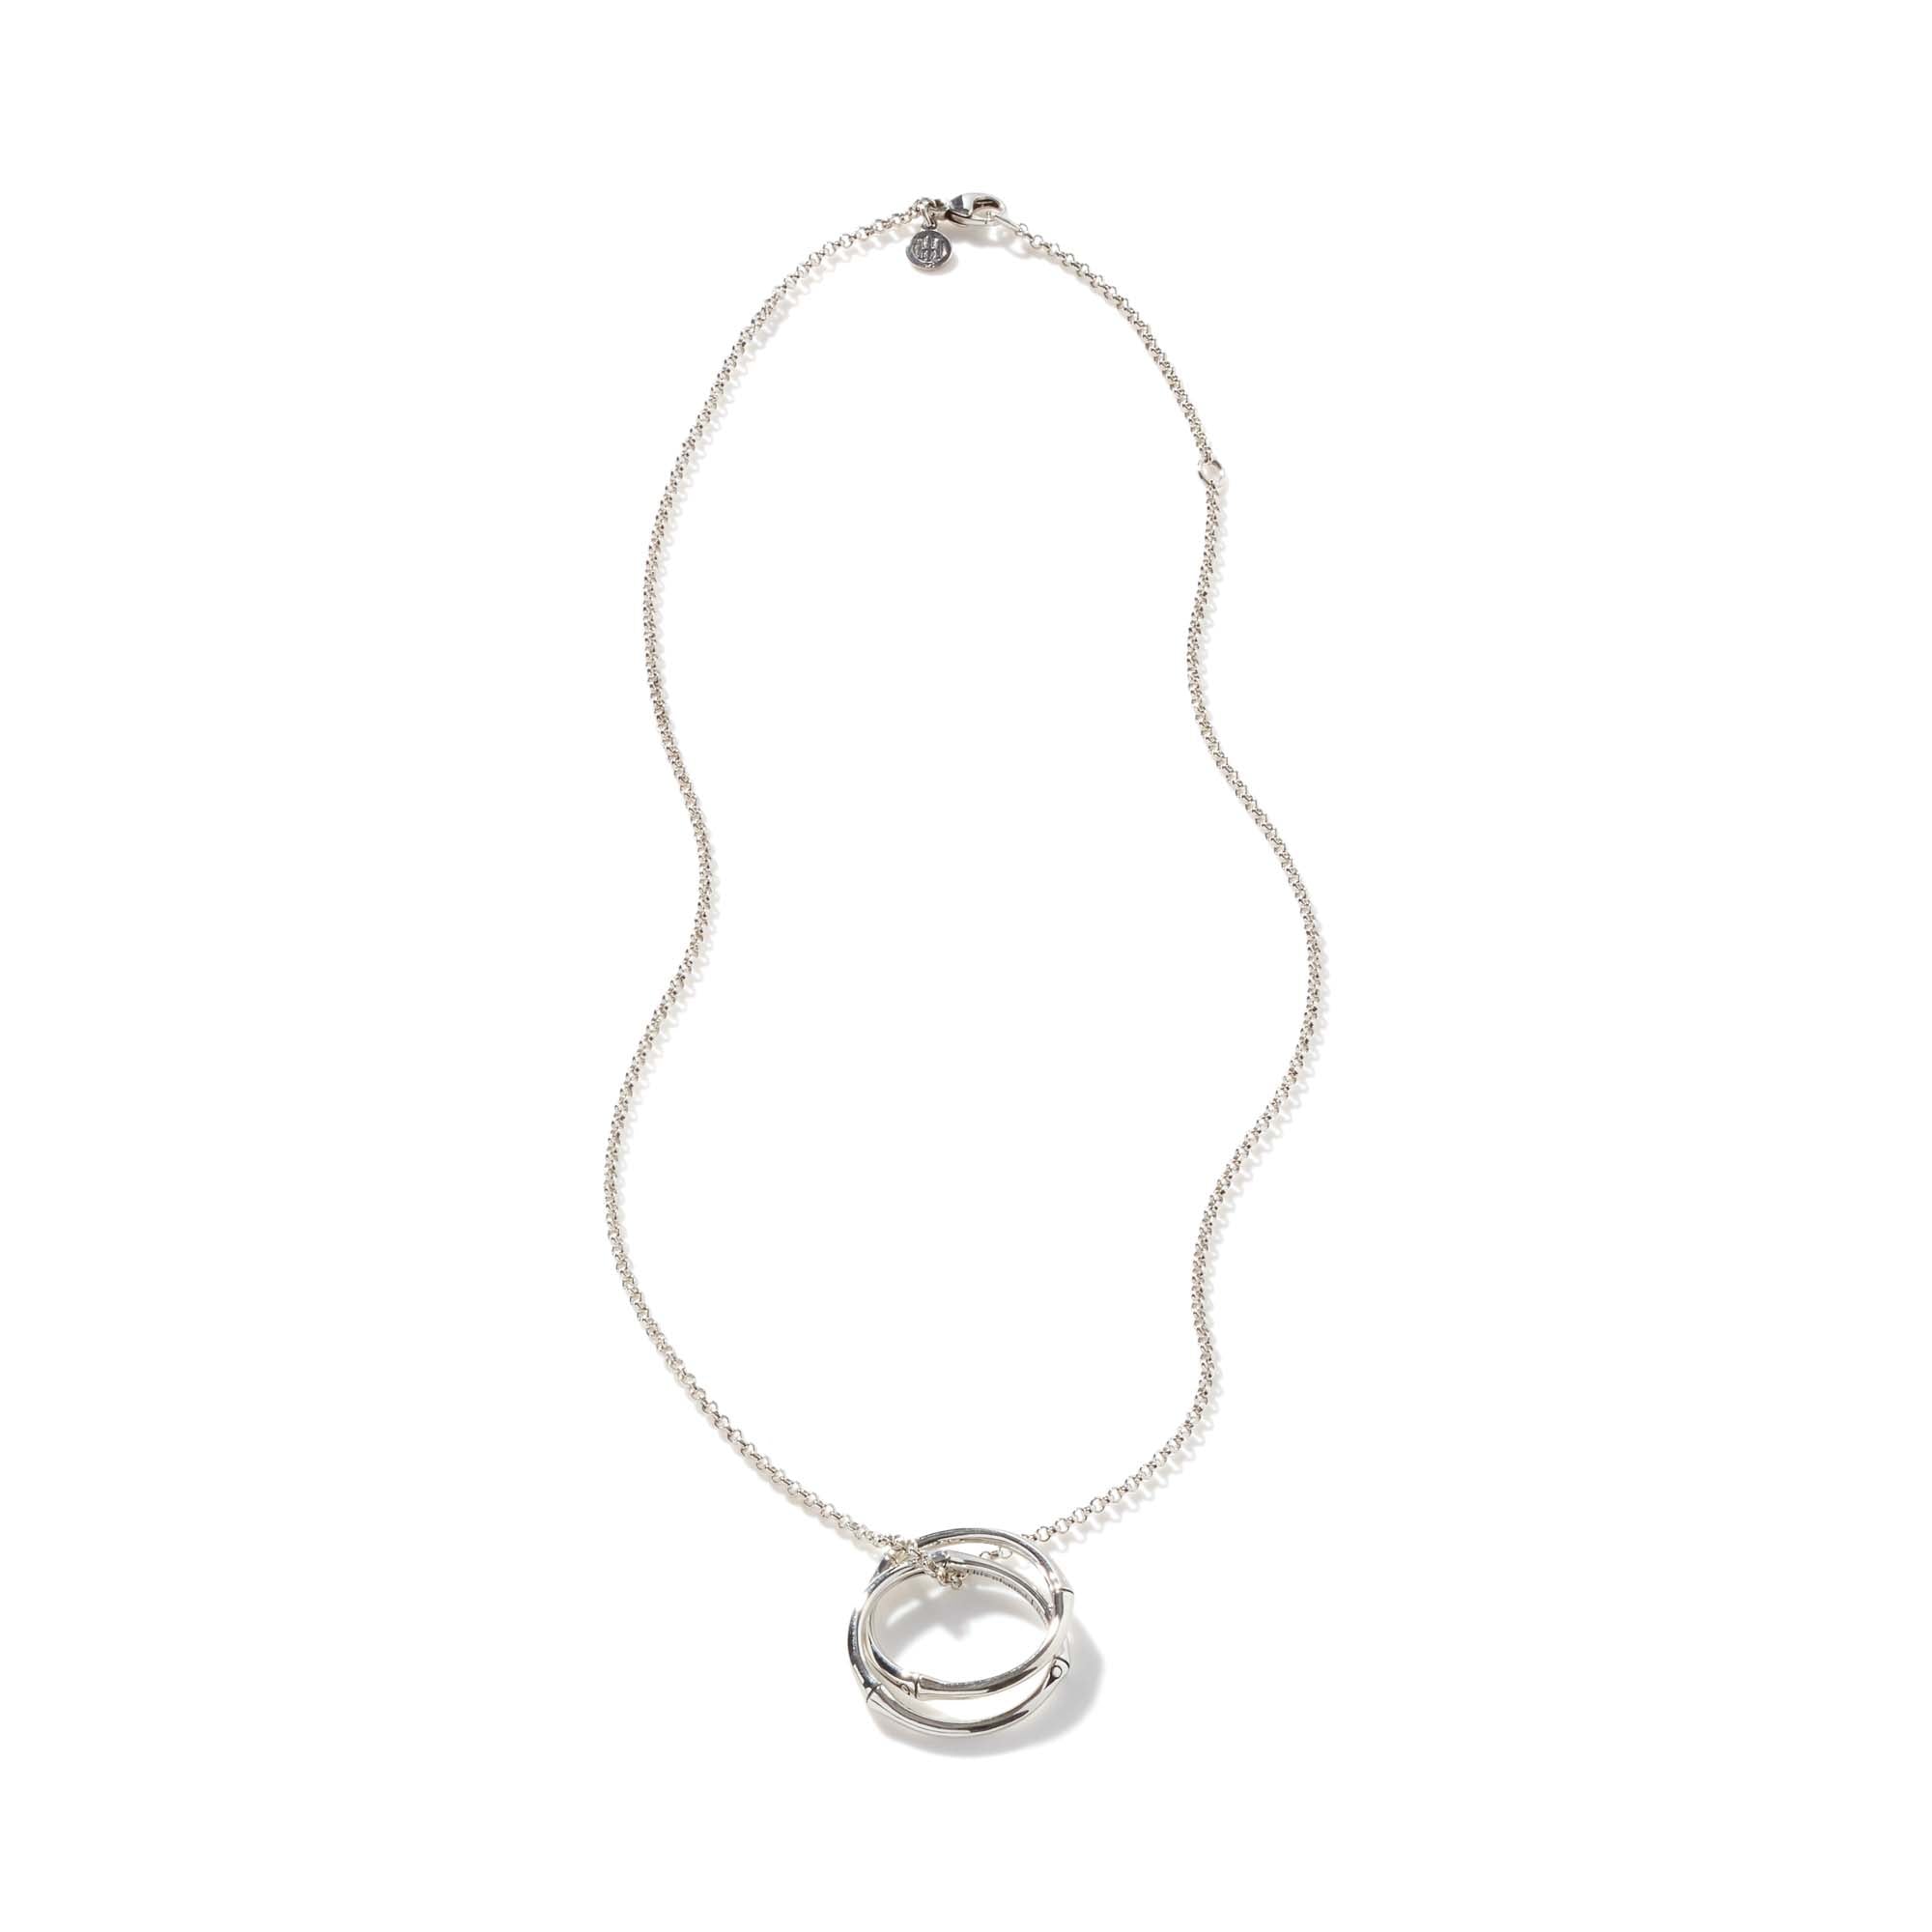 Bamboo Pendant Necklace, Sterling Silver|NB5635 – John Hardy